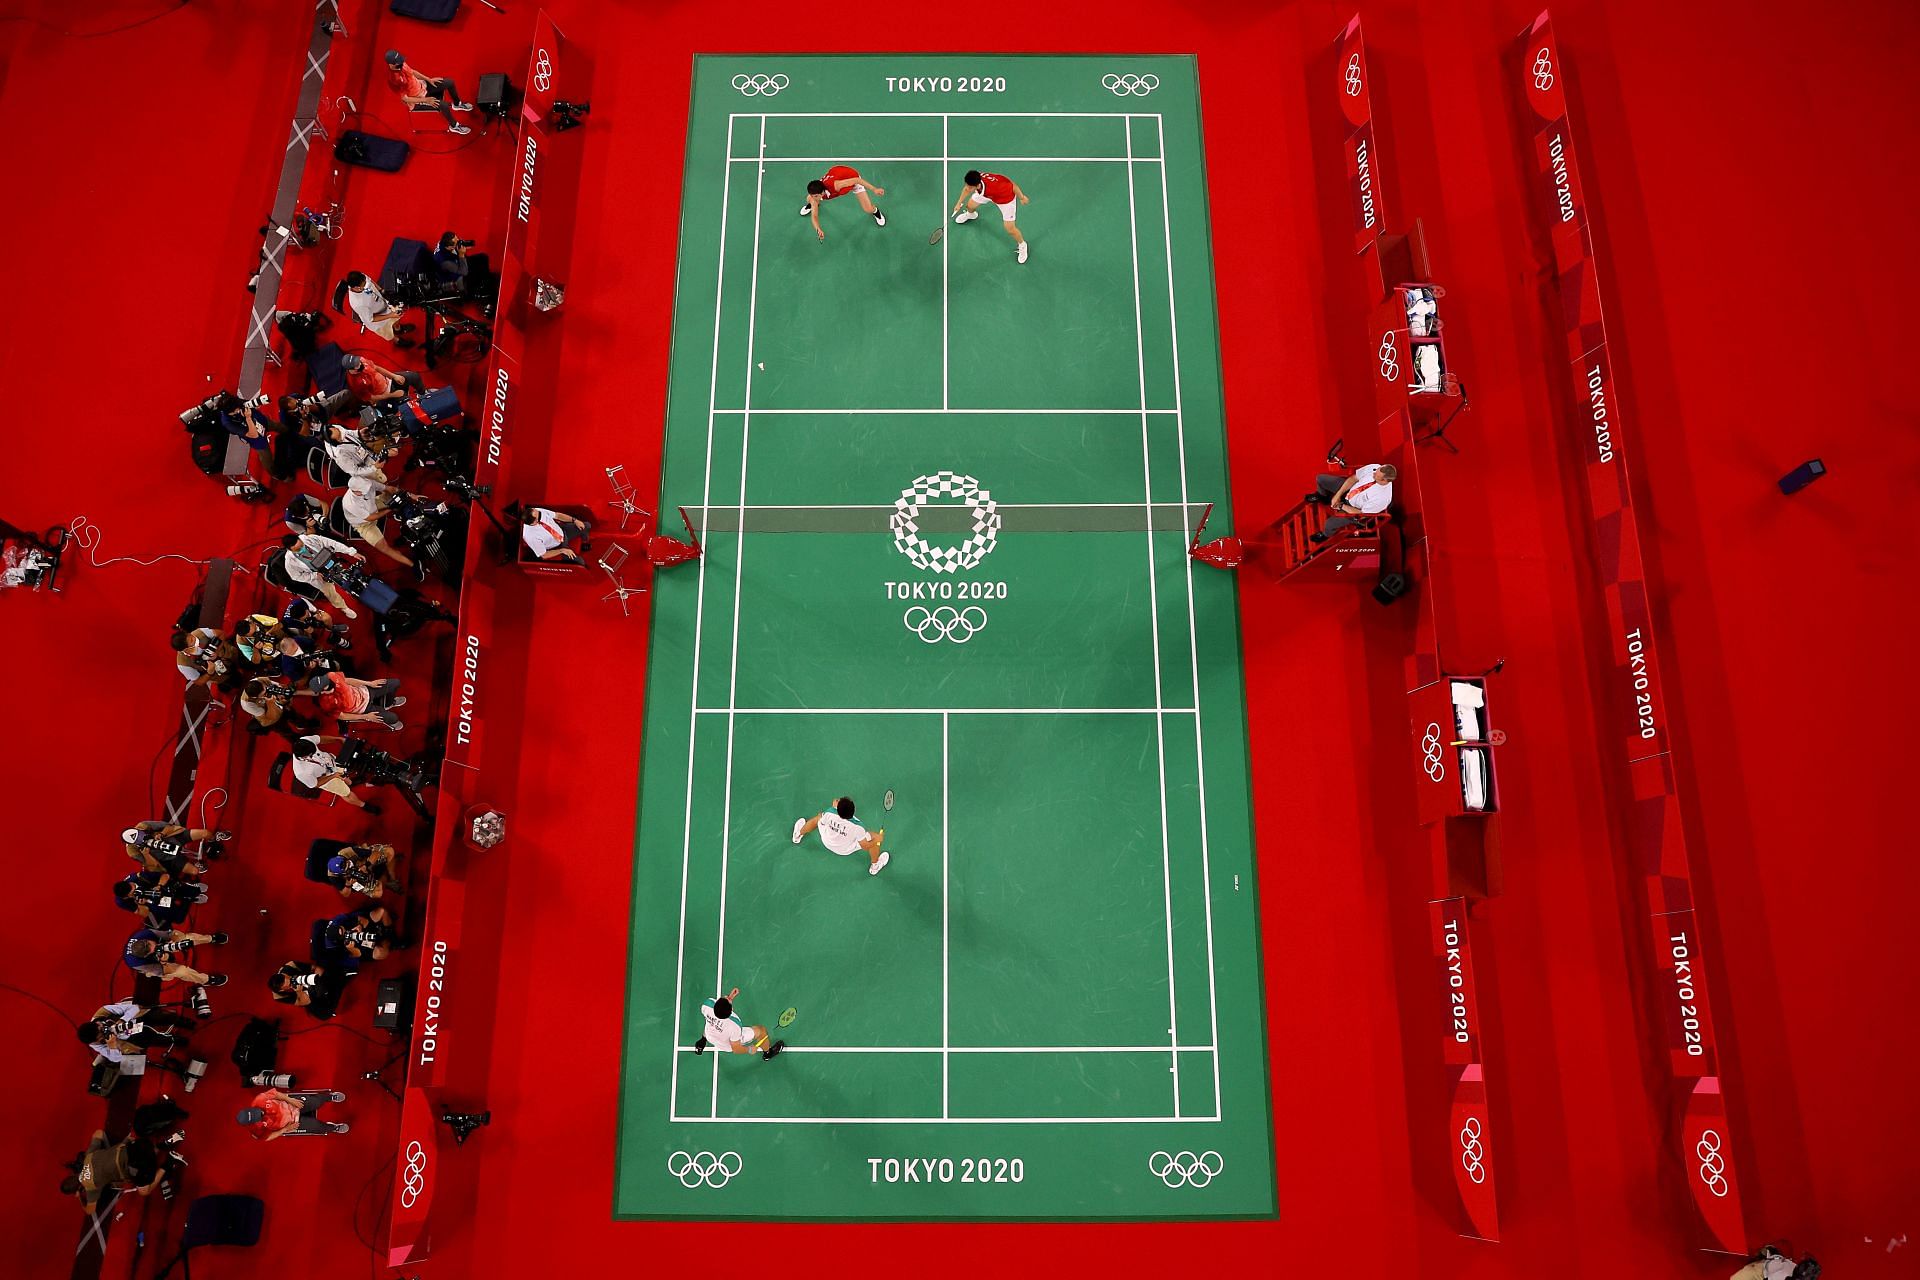 A badminton match in progress at the Tokyo Olympics. (PC: Getty Images)